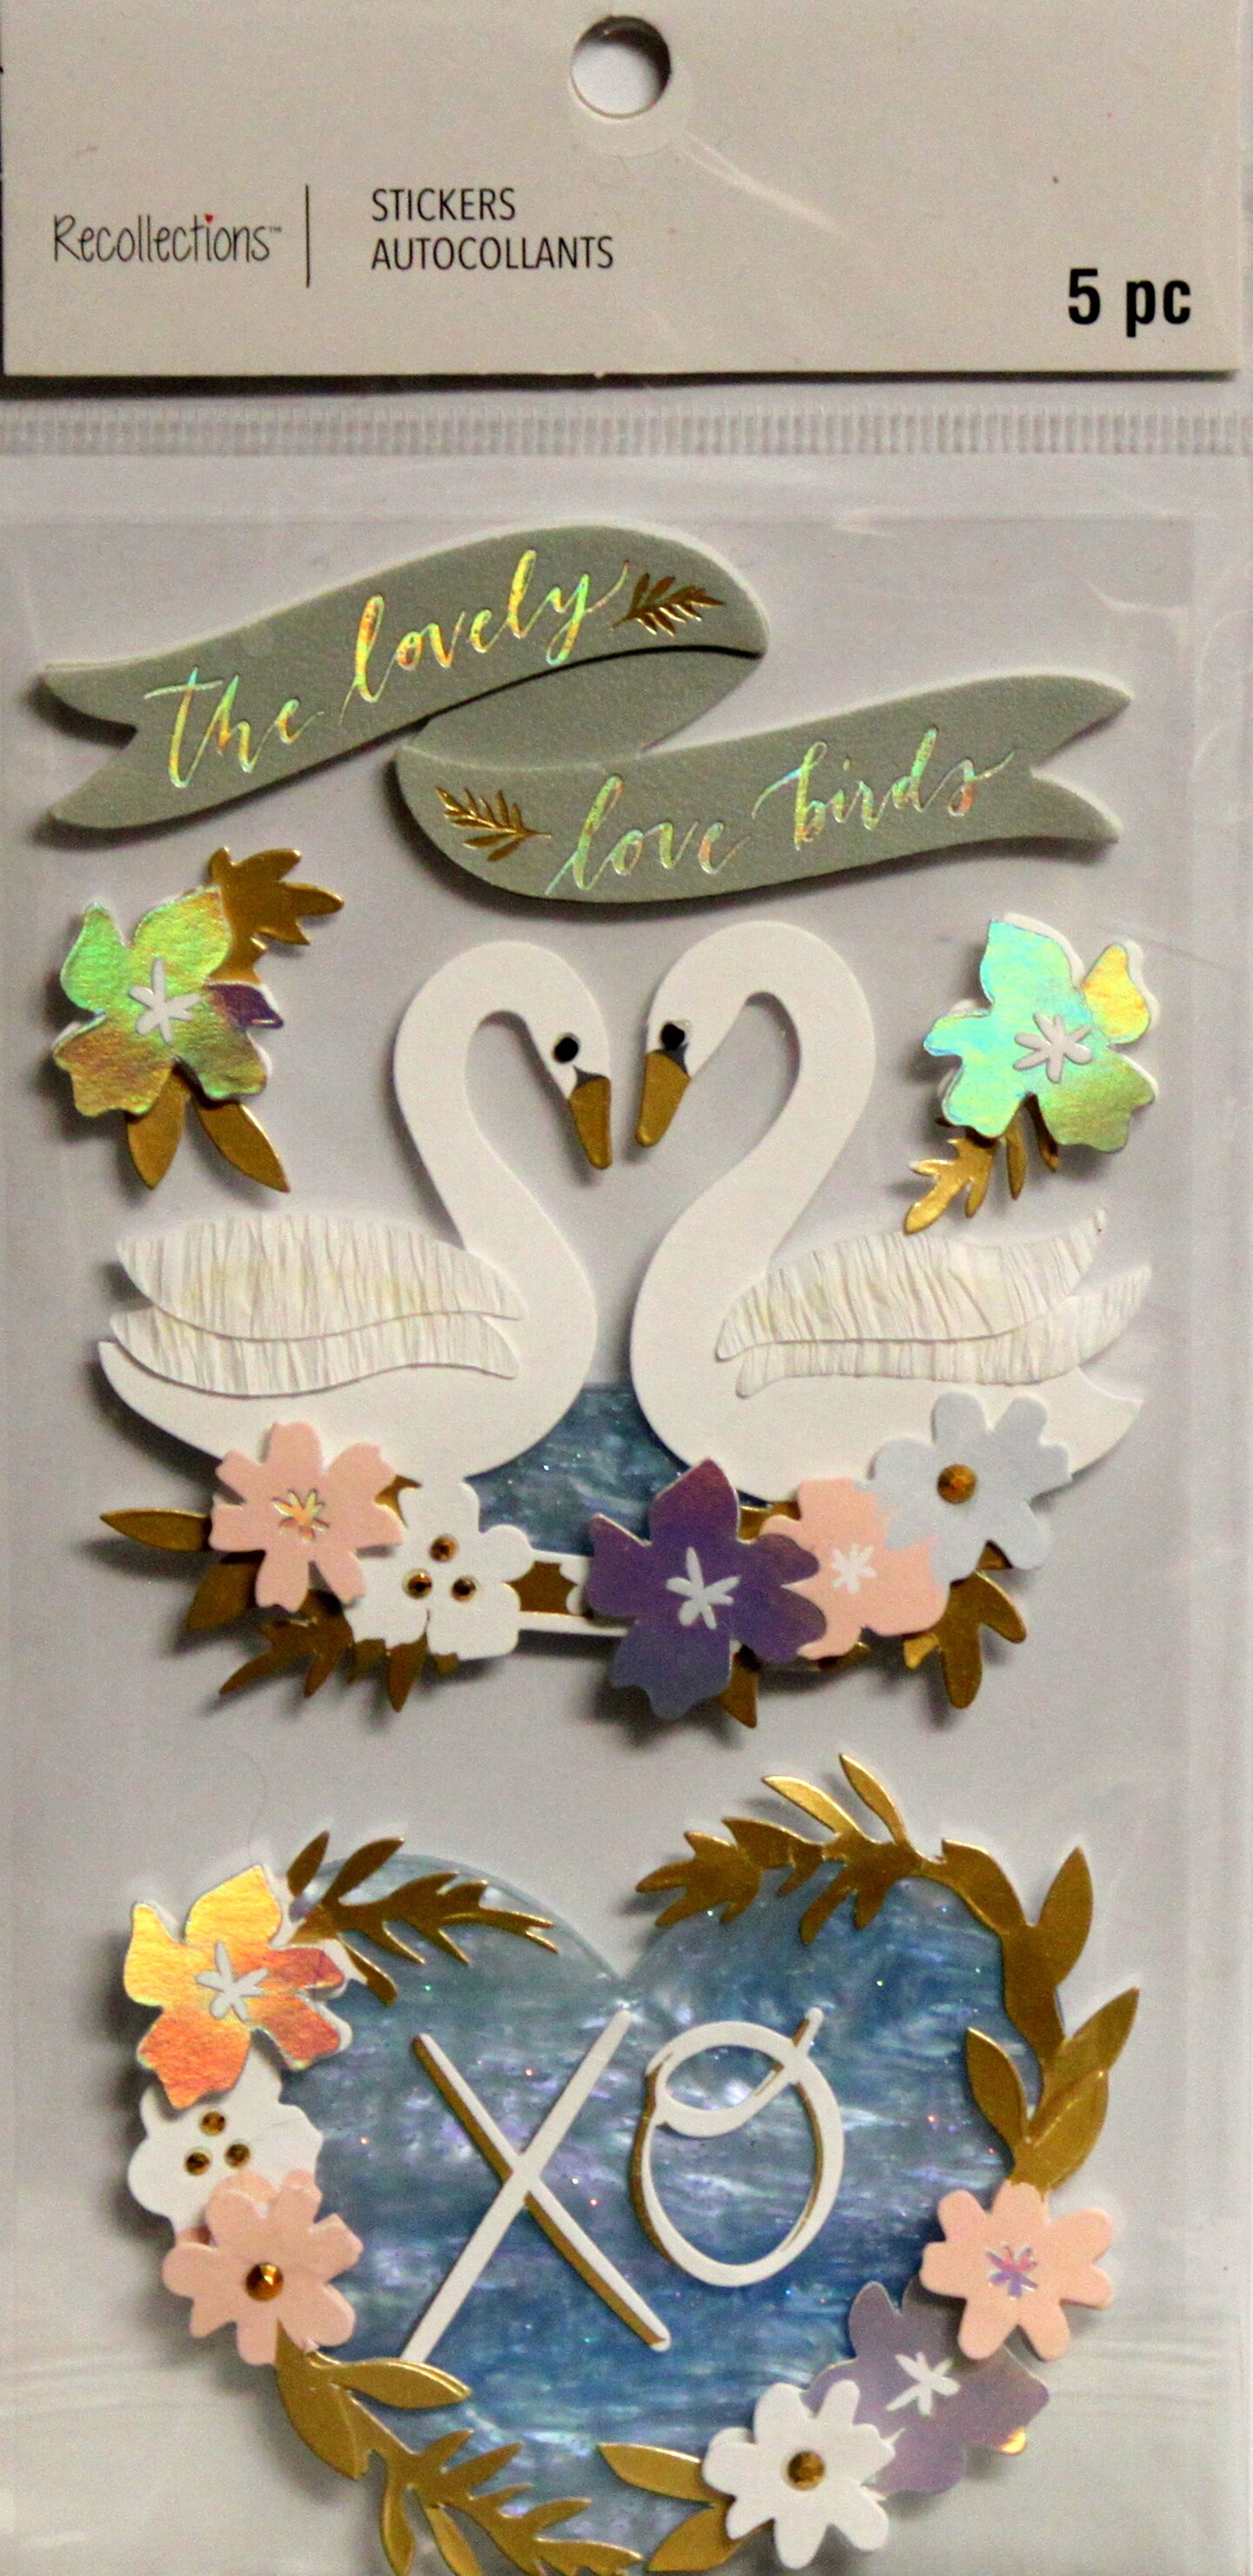 Recollections The Lovely Love Birds Dimensional Stickers